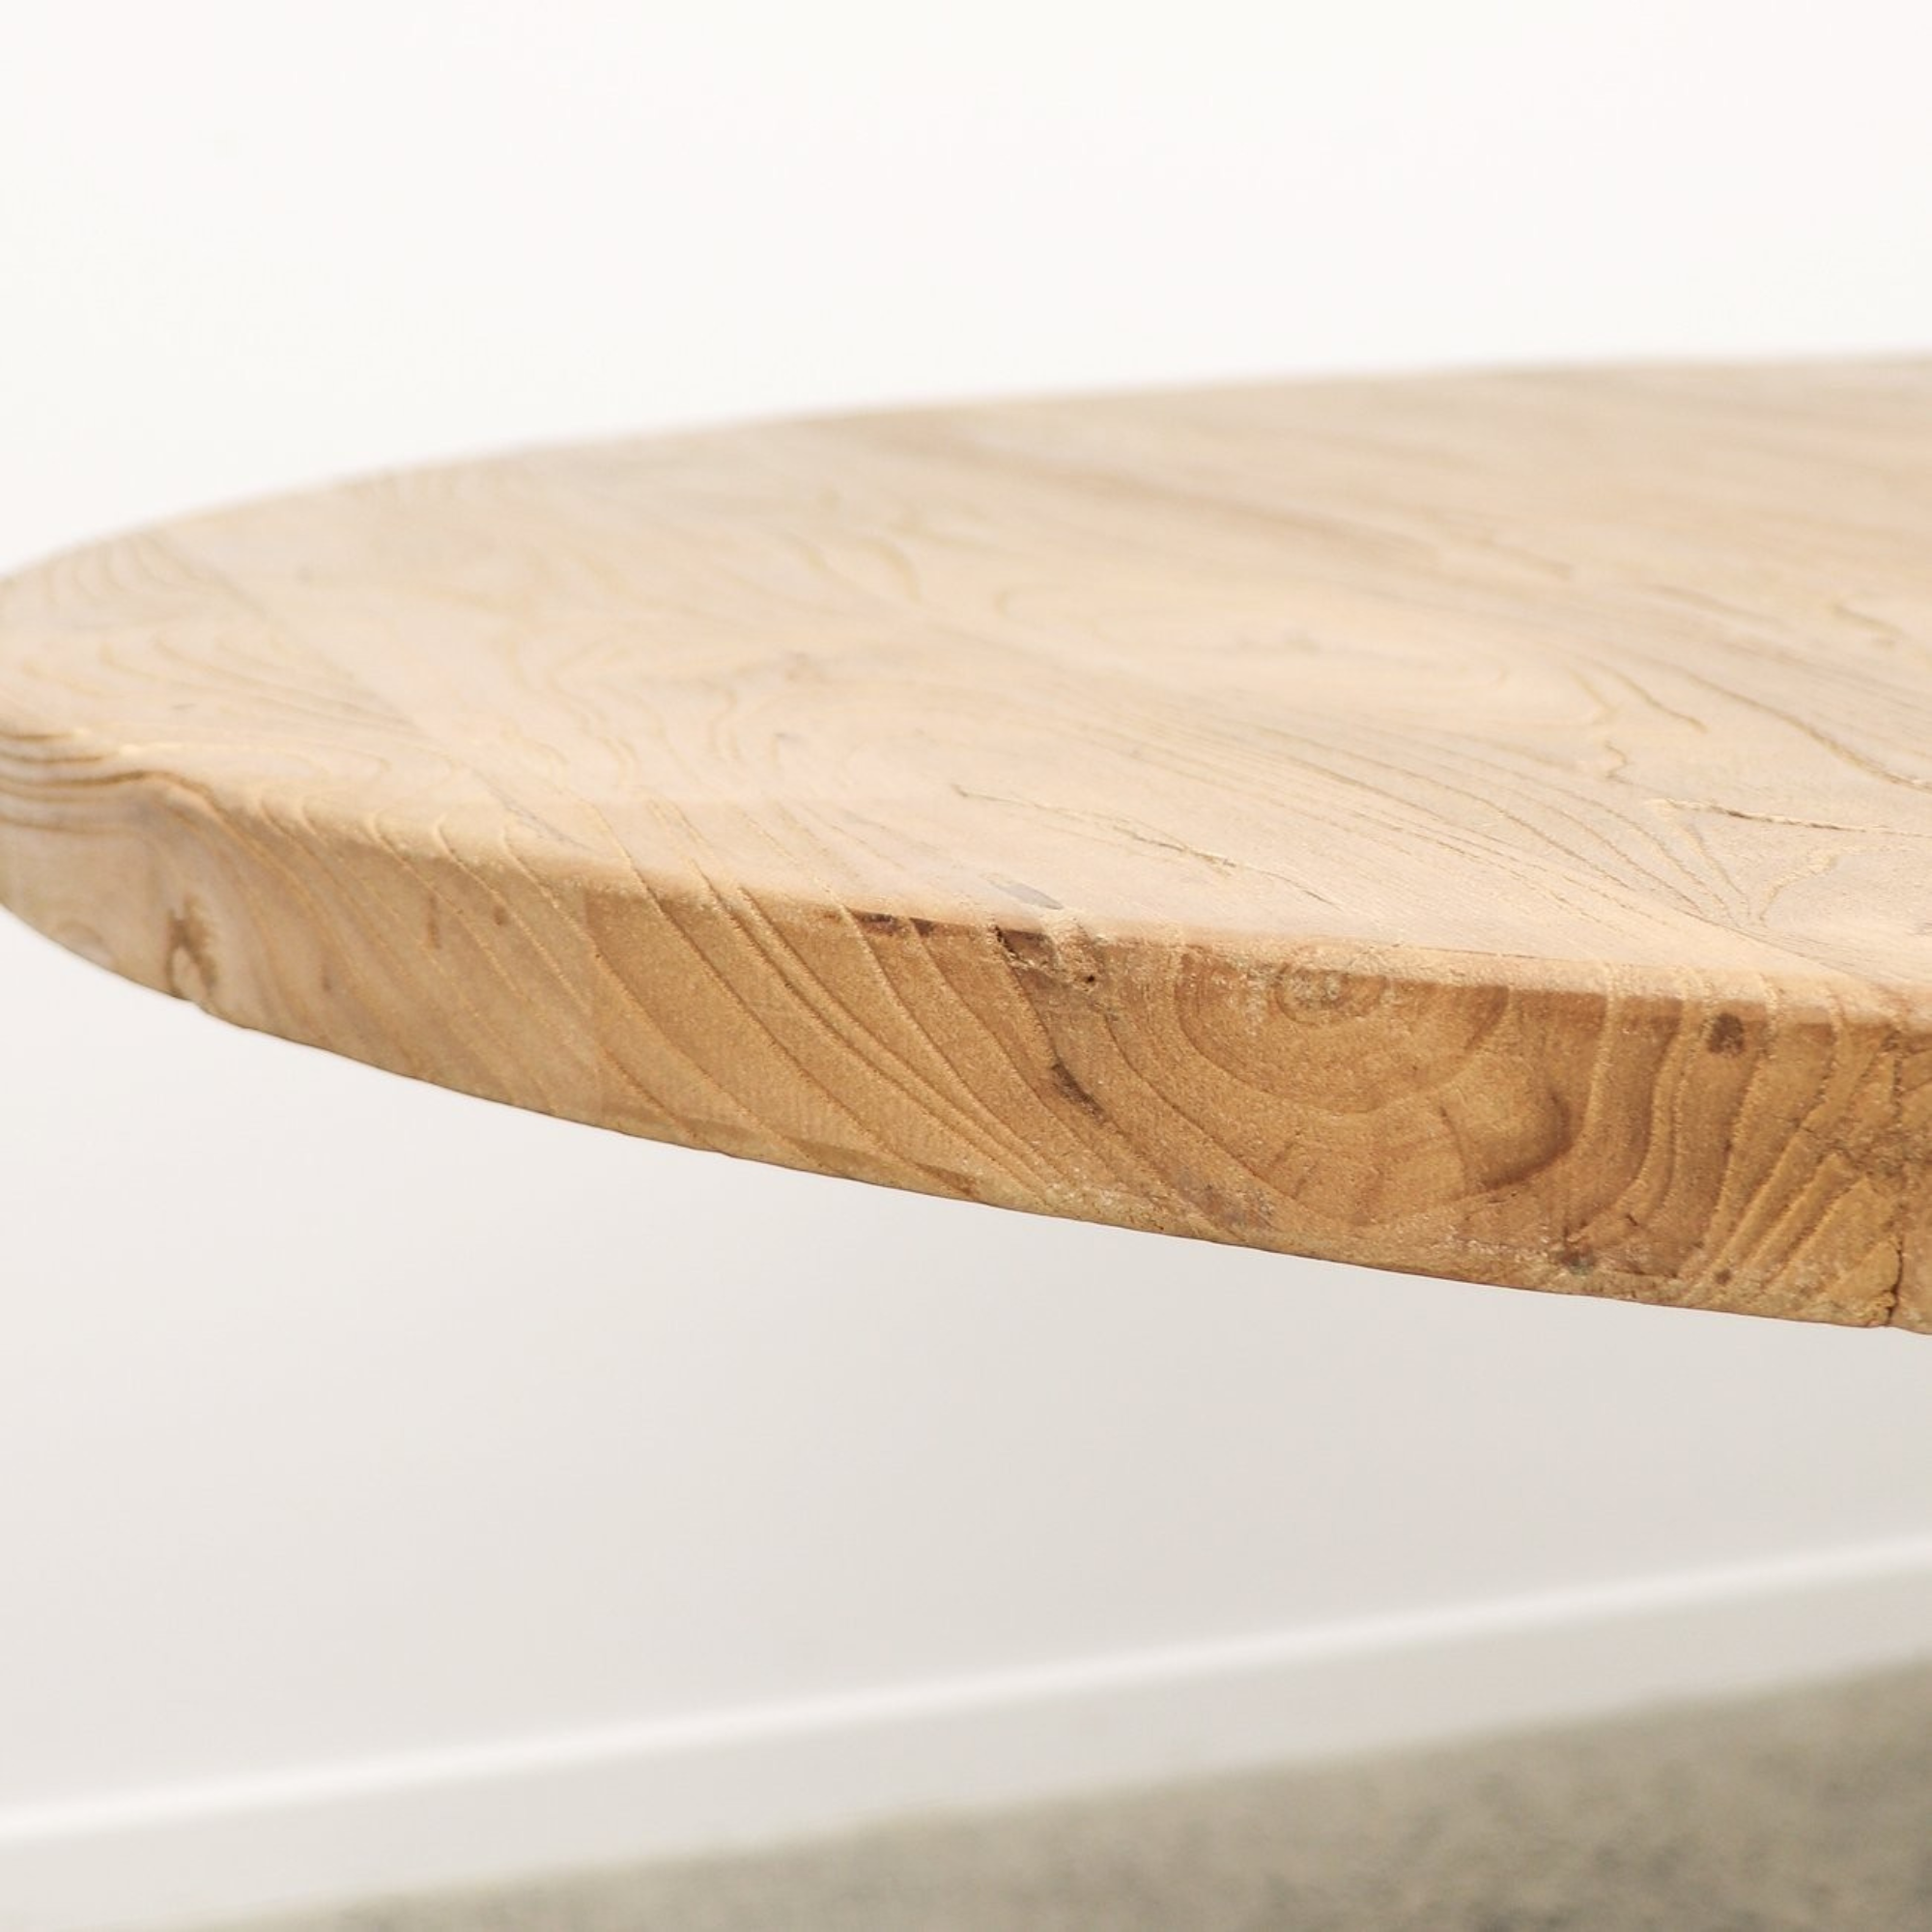 MULHOUSE SALVAGED ELM ROUND DINING TABLE | 2 SIZES